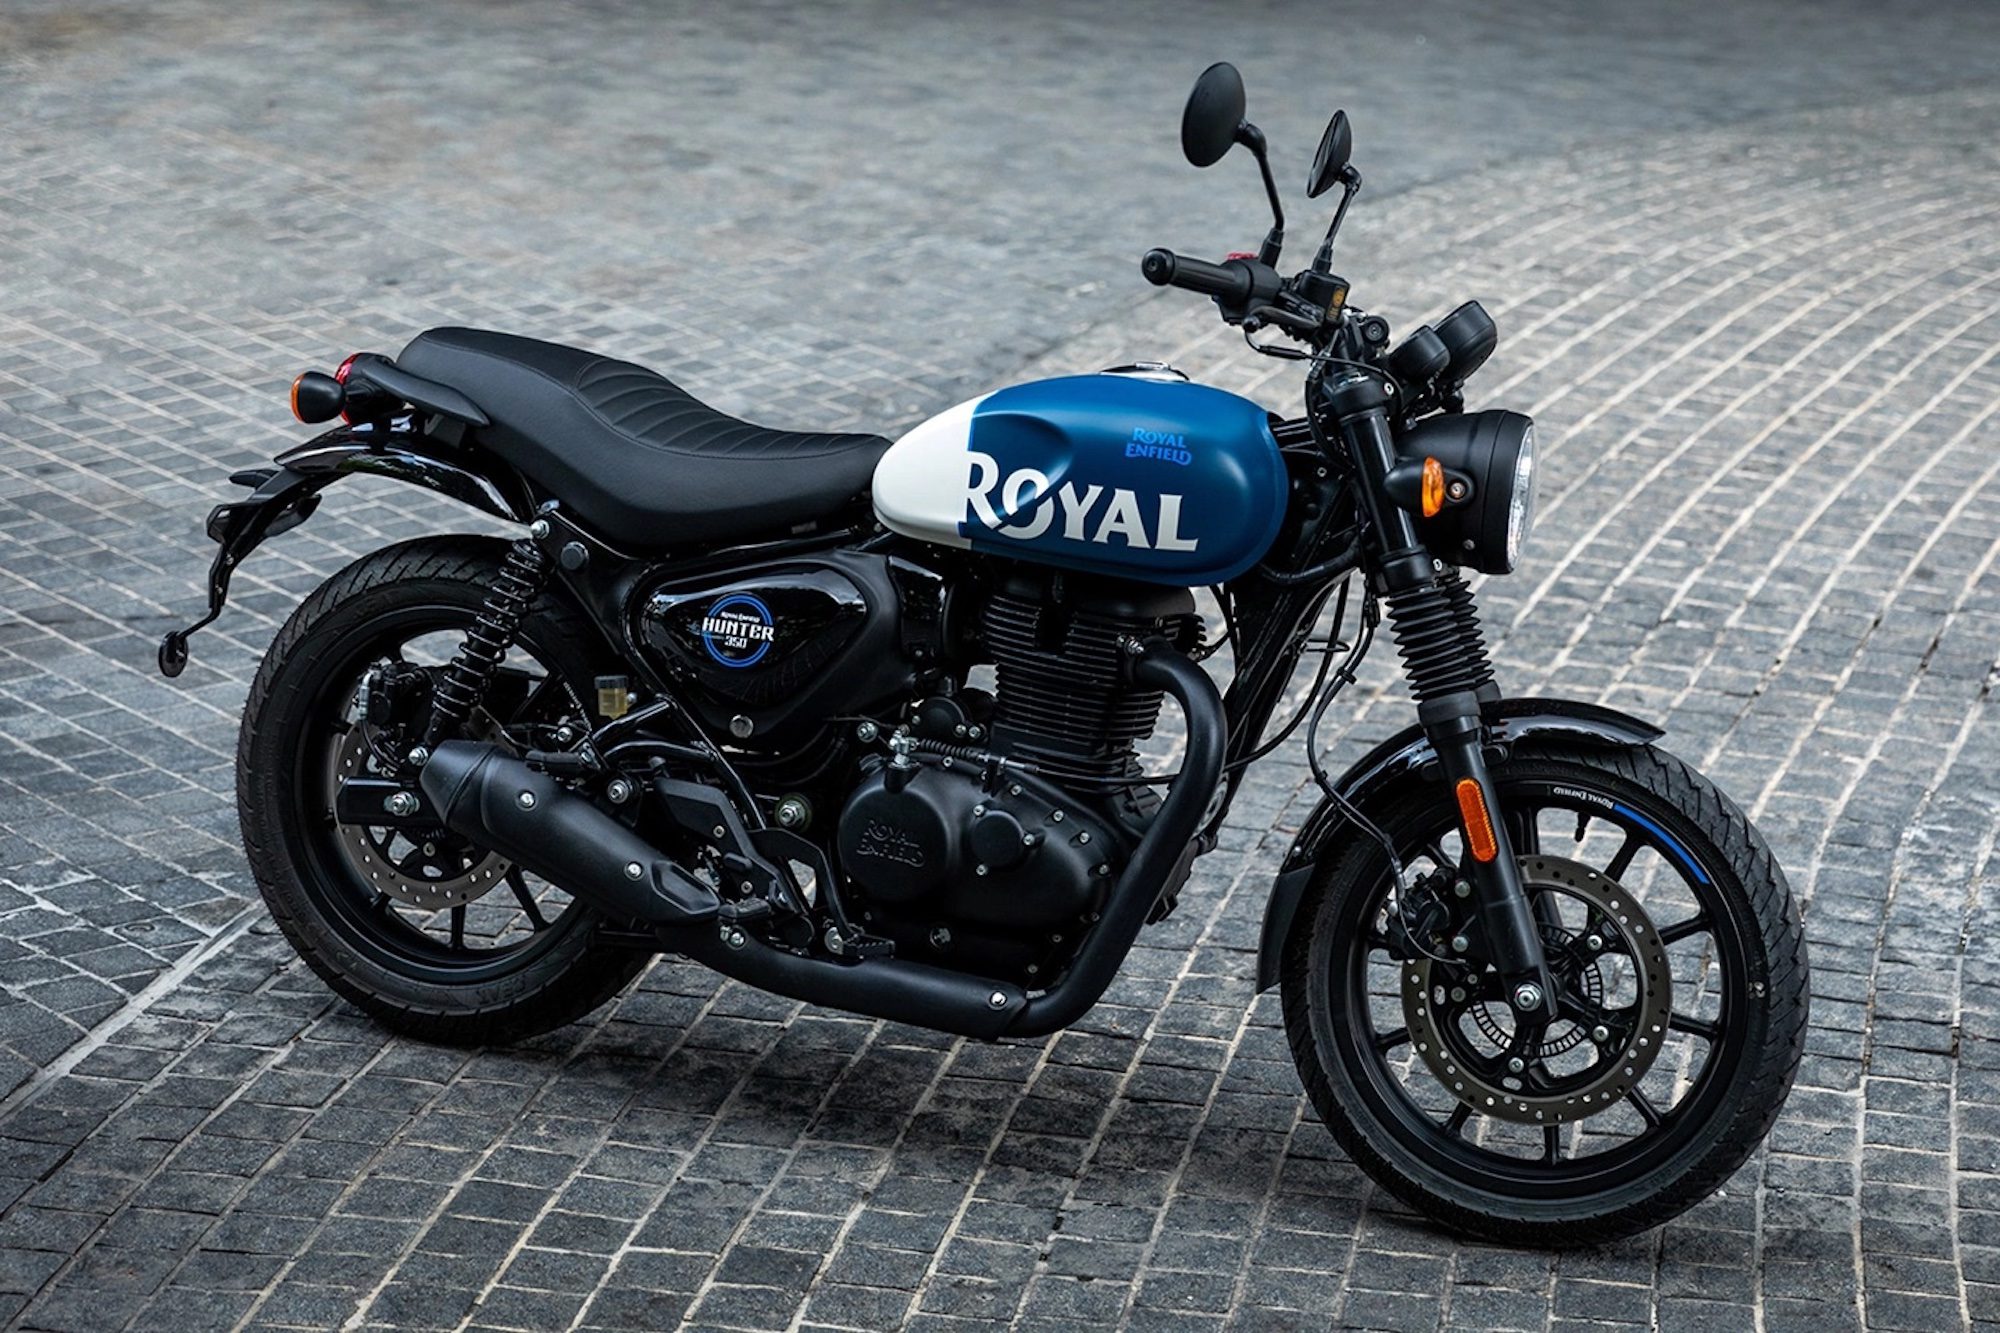 The Royal Enfield Hunter 350. Media sourced from MCN.